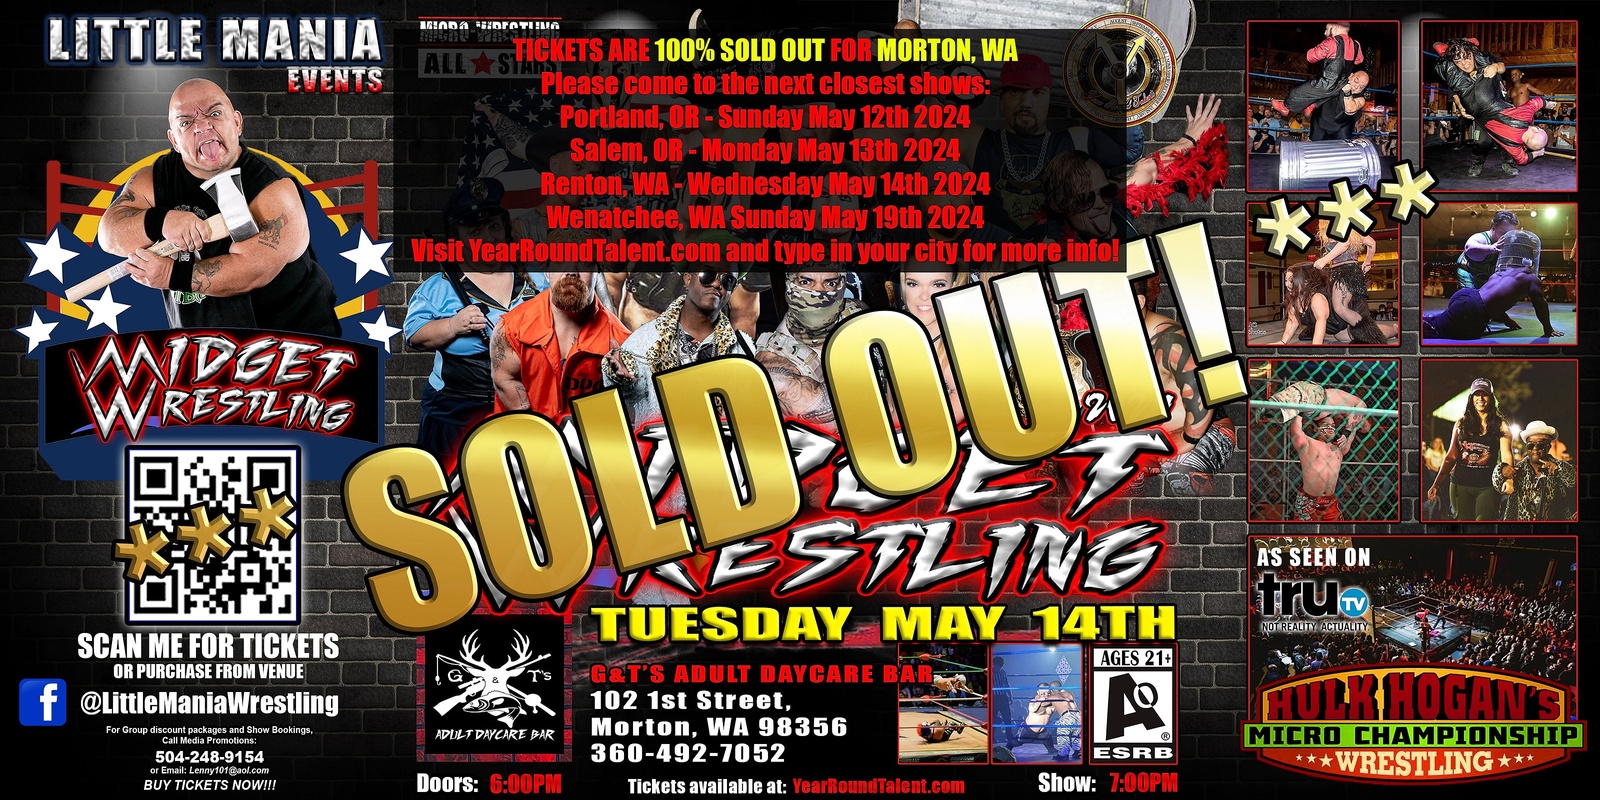 Banner image for Morton, WA - Micro-Wresting All * Stars: Little Mania Rips Through the Ring!